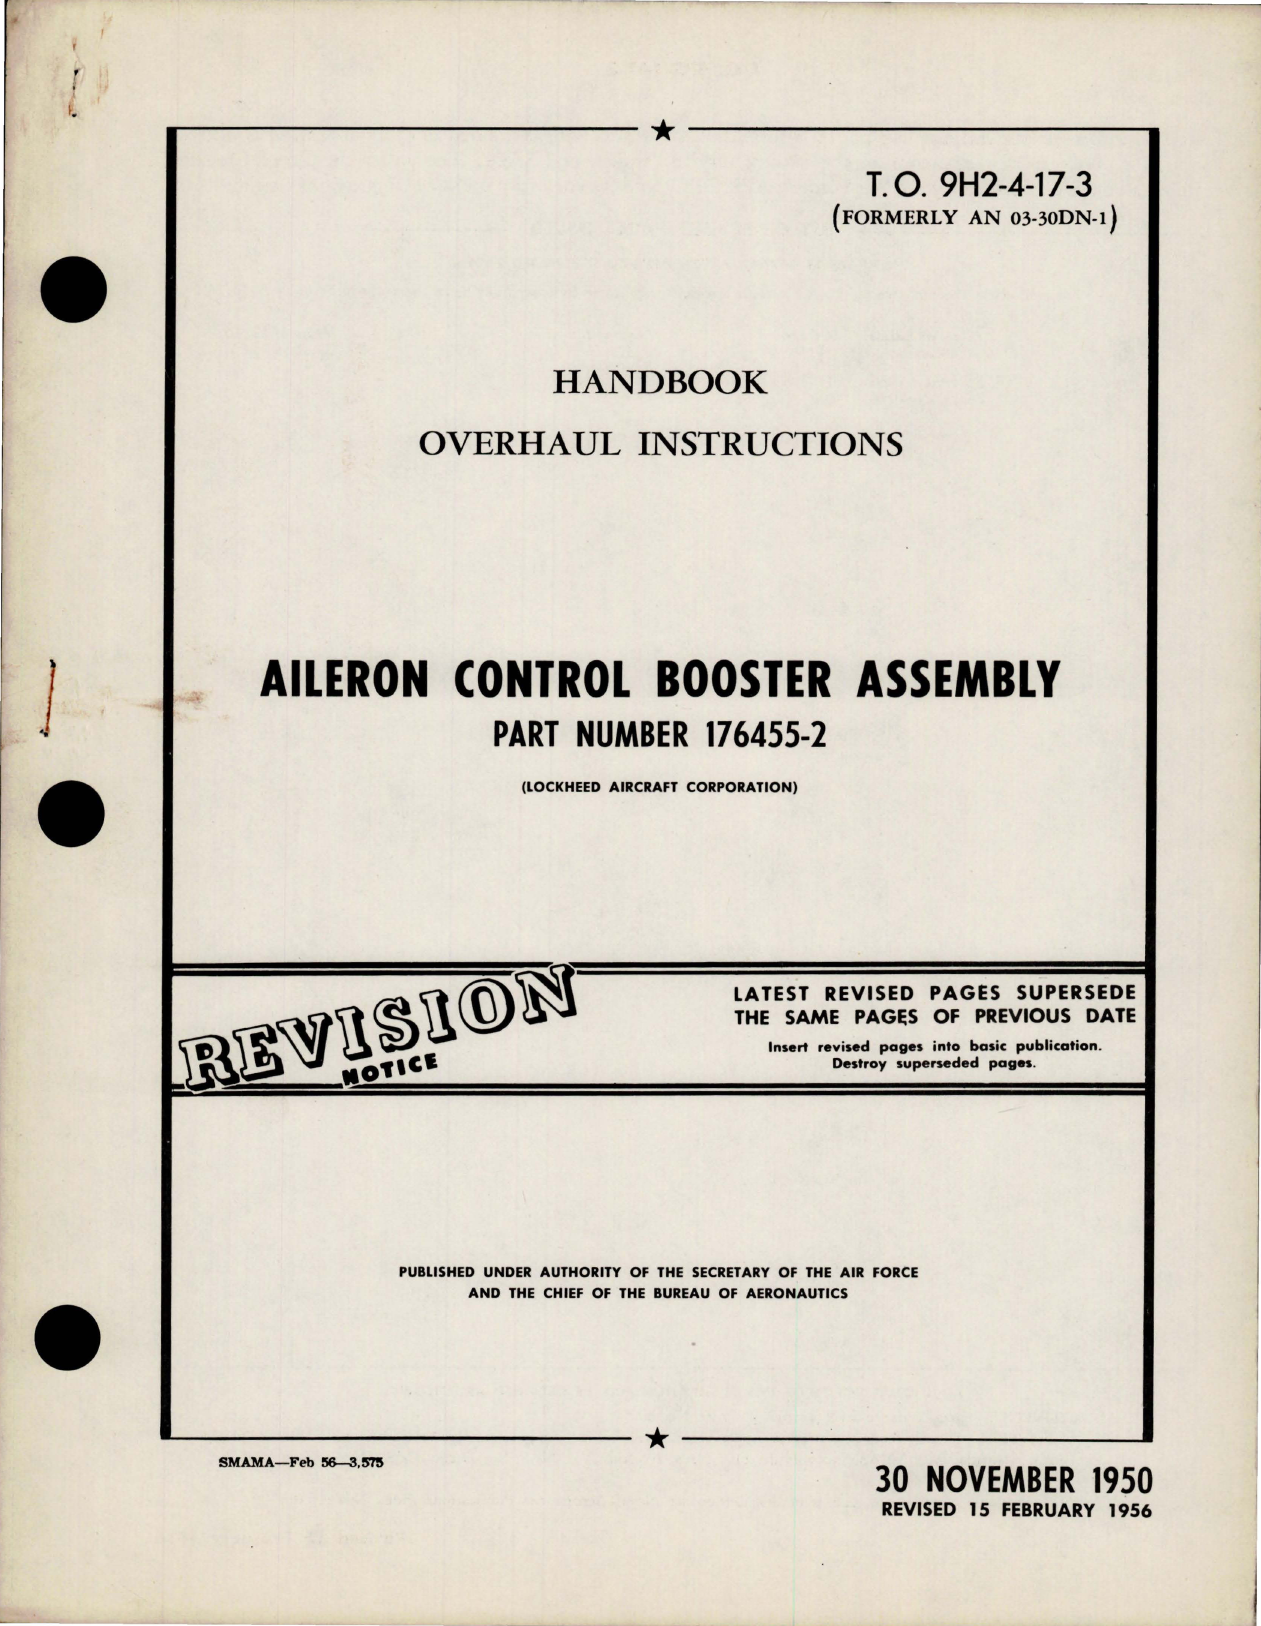 Sample page 1 from AirCorps Library document: Overhaul Instructions for Aileron Control Booster Assembly - Part 176455-2 